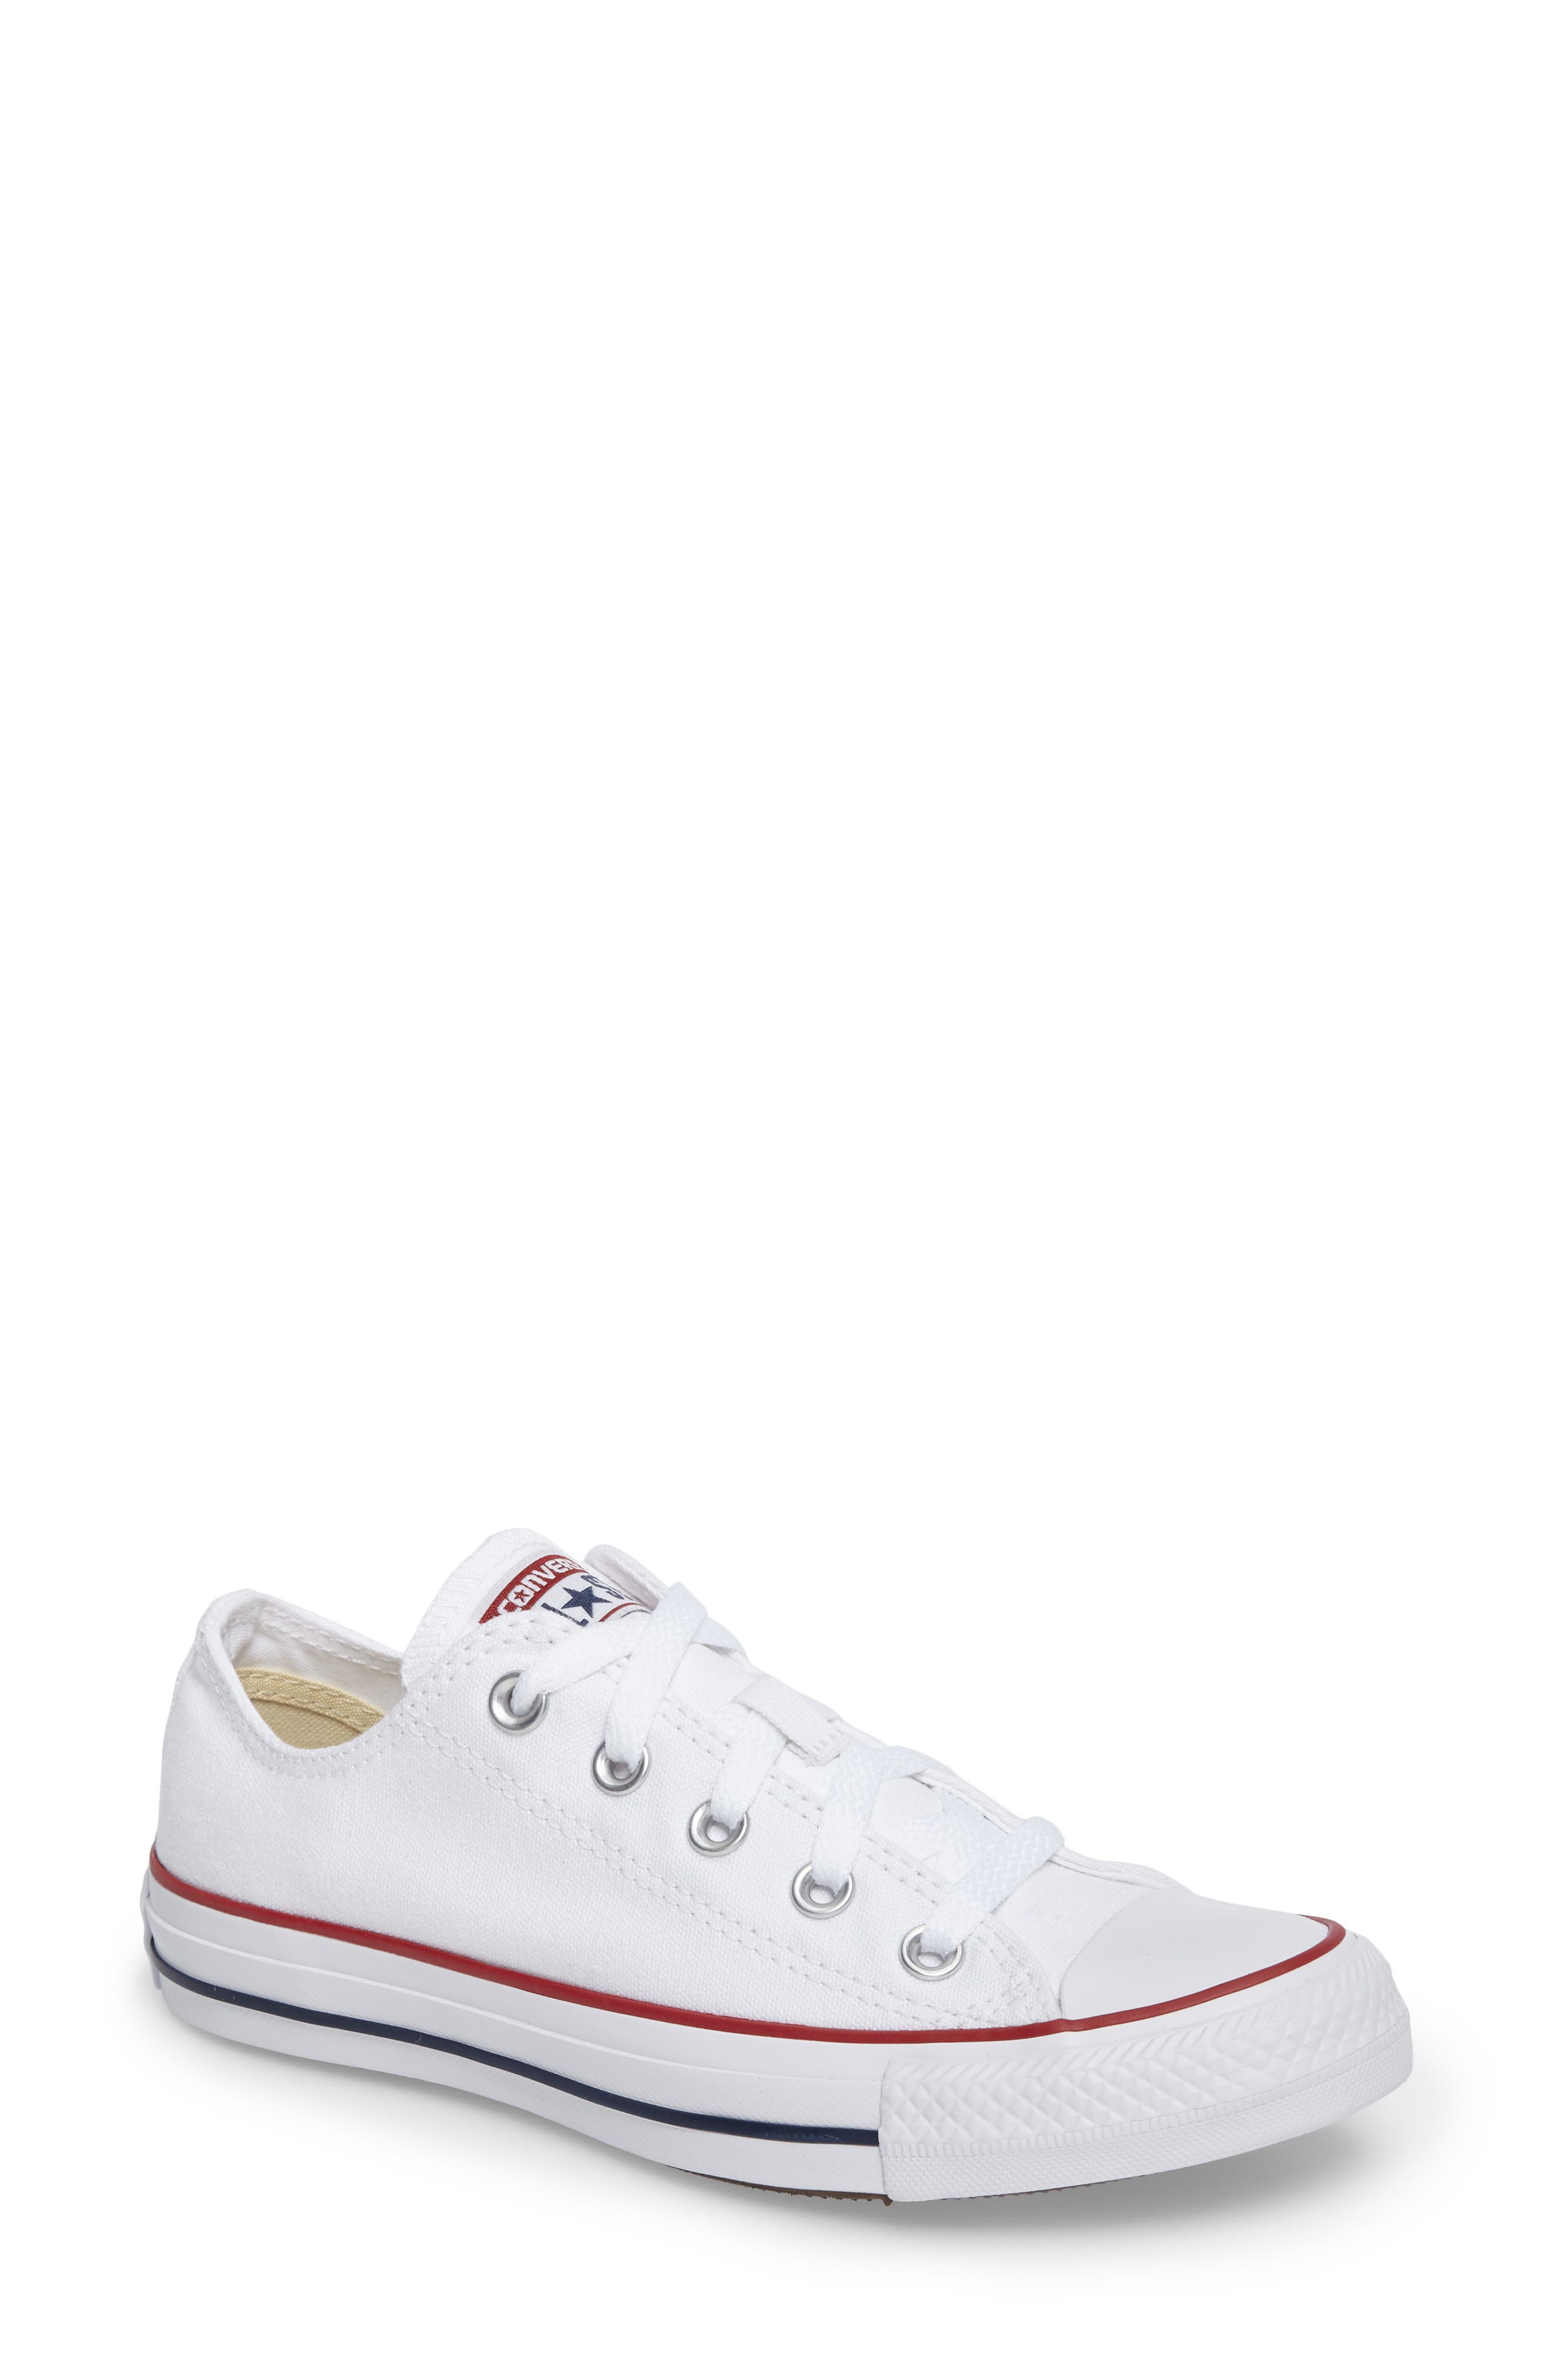 toddler girl white converse shoes